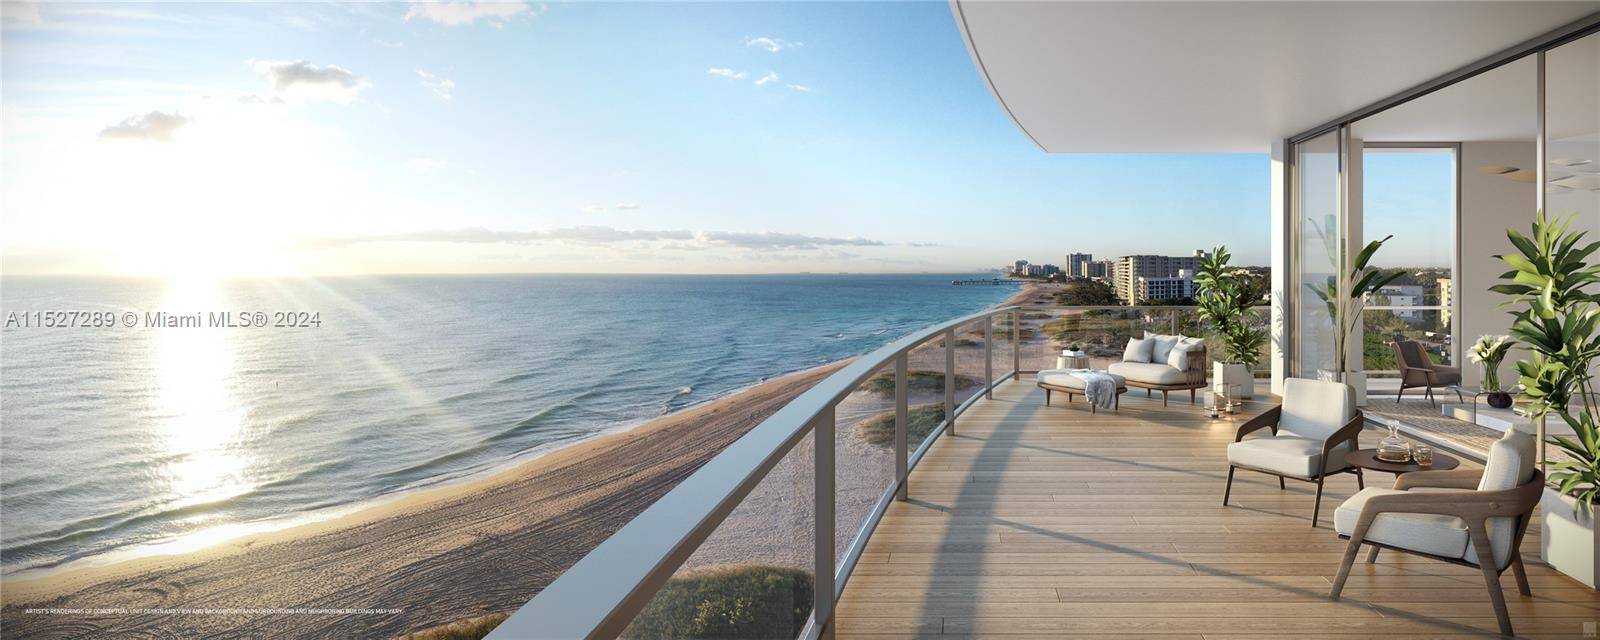 Exquisite Beachfront Living at Solemar, Pompano Beach Discover coastal paradise in this 2 bedroom, 2 bathroom condo at Solemar.